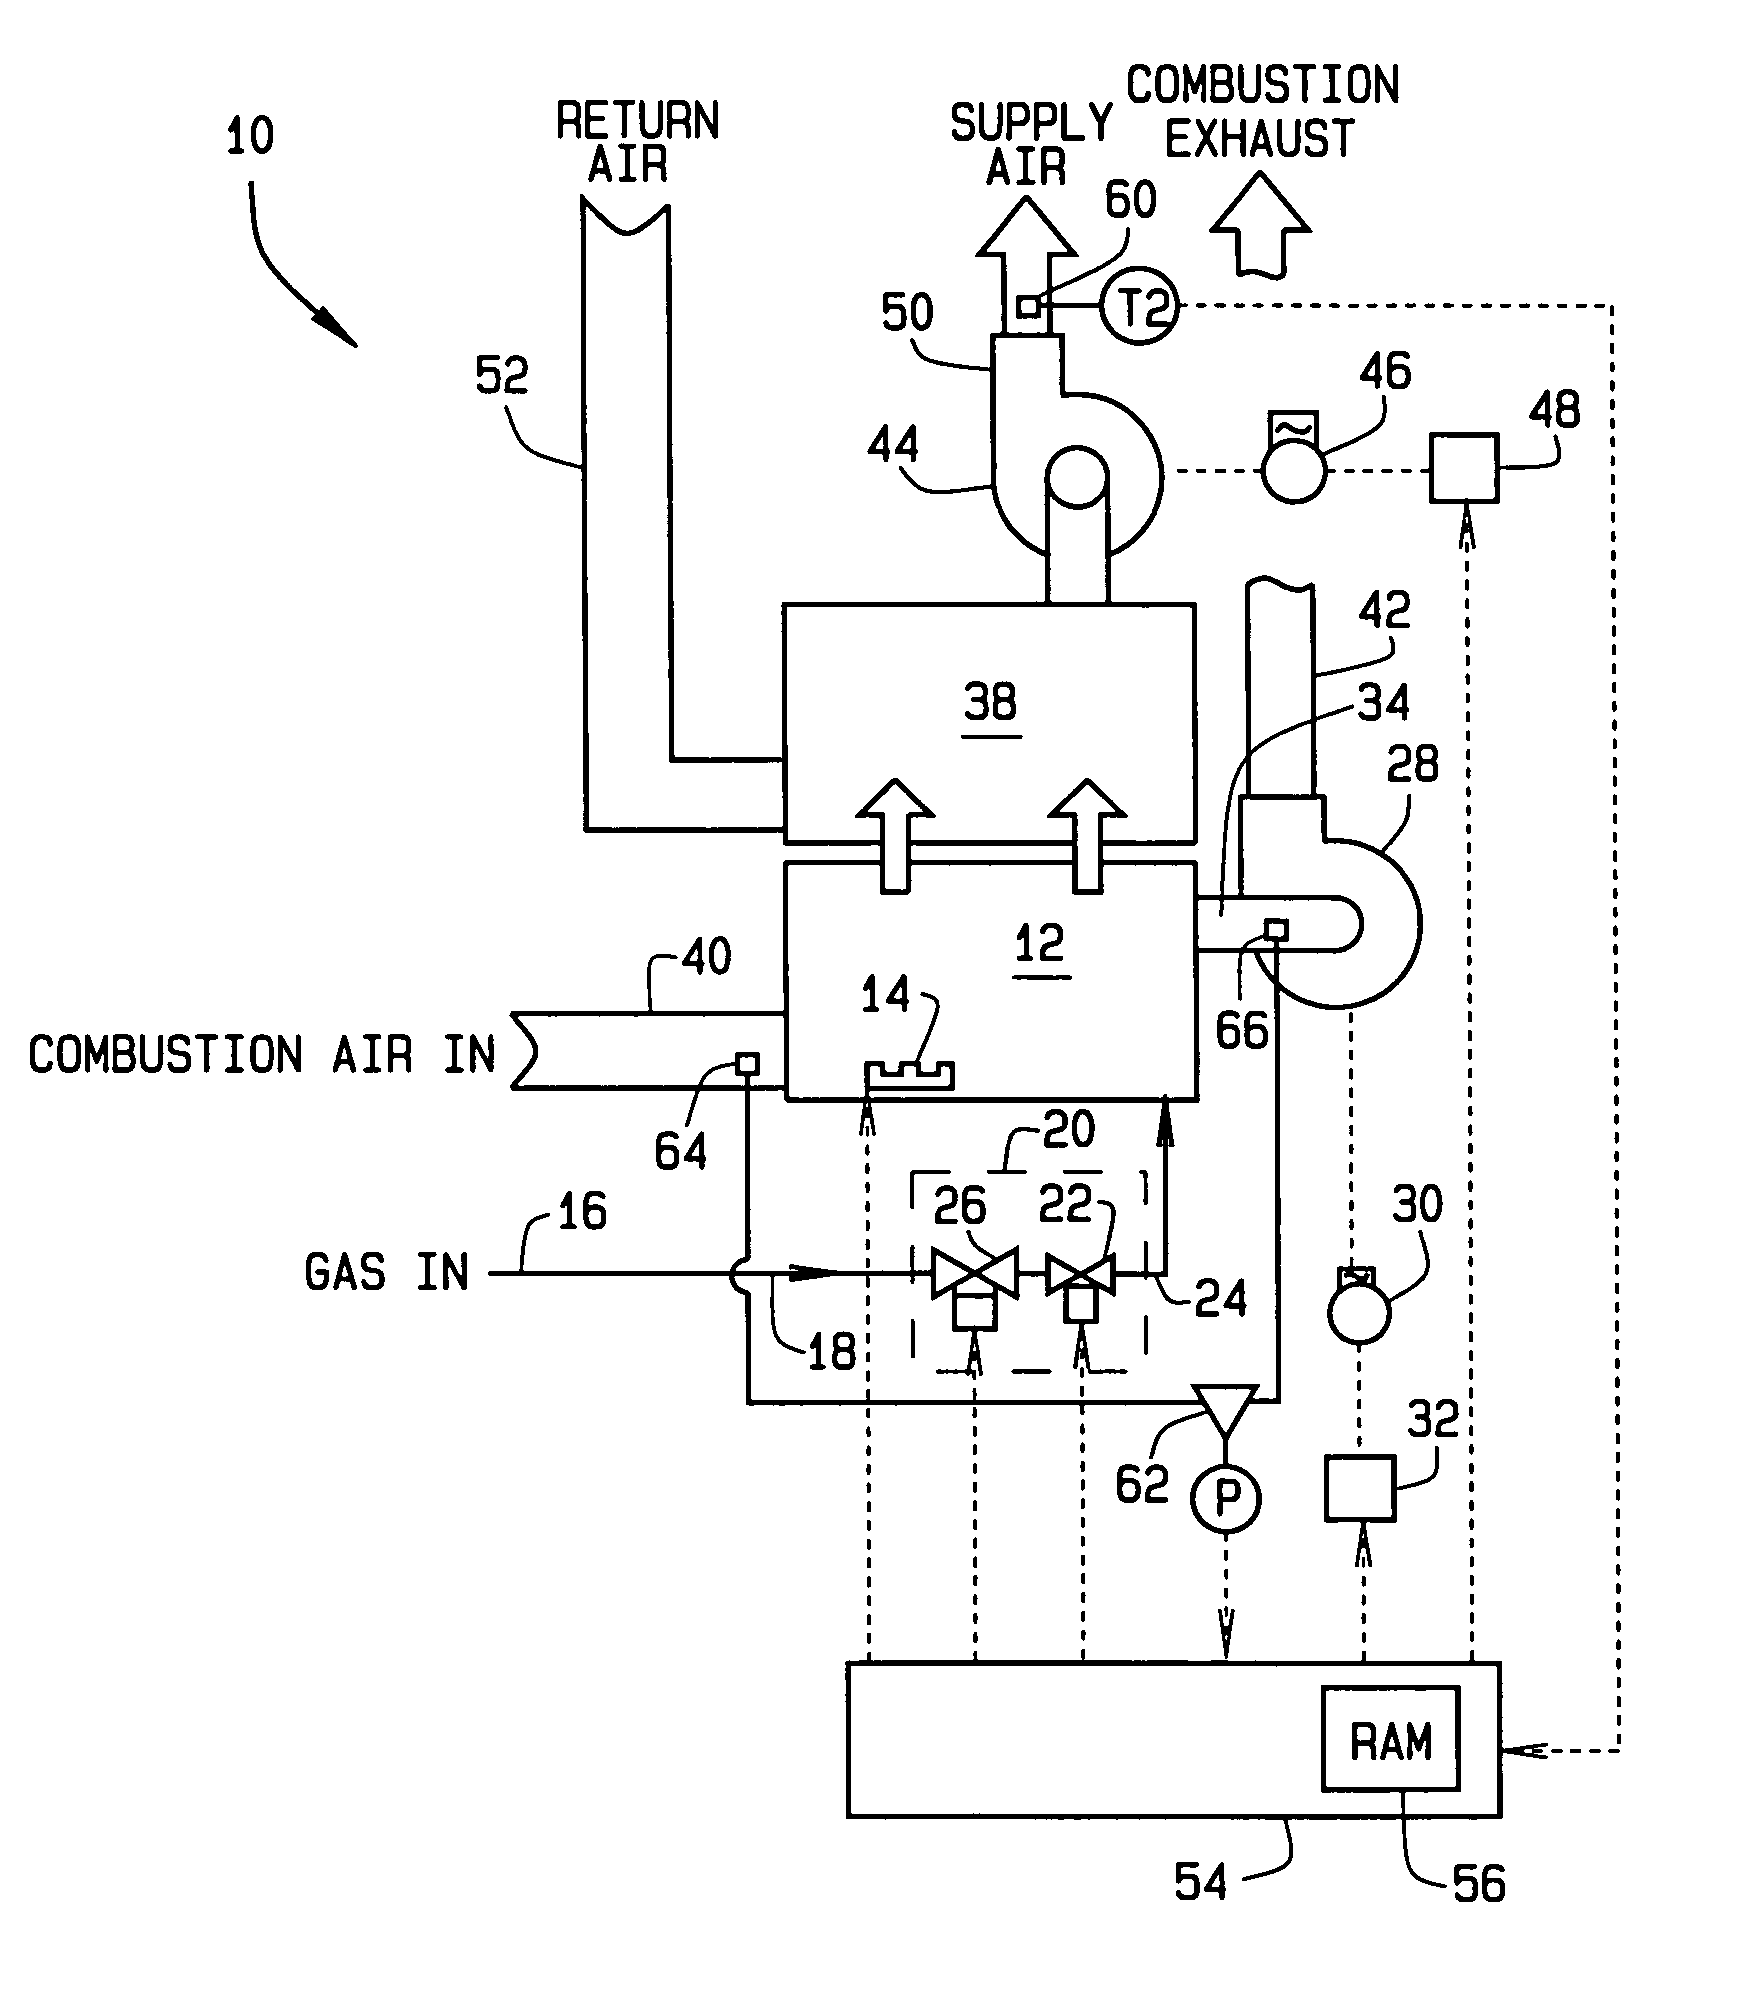 Apparatus and methods for variable furnace control